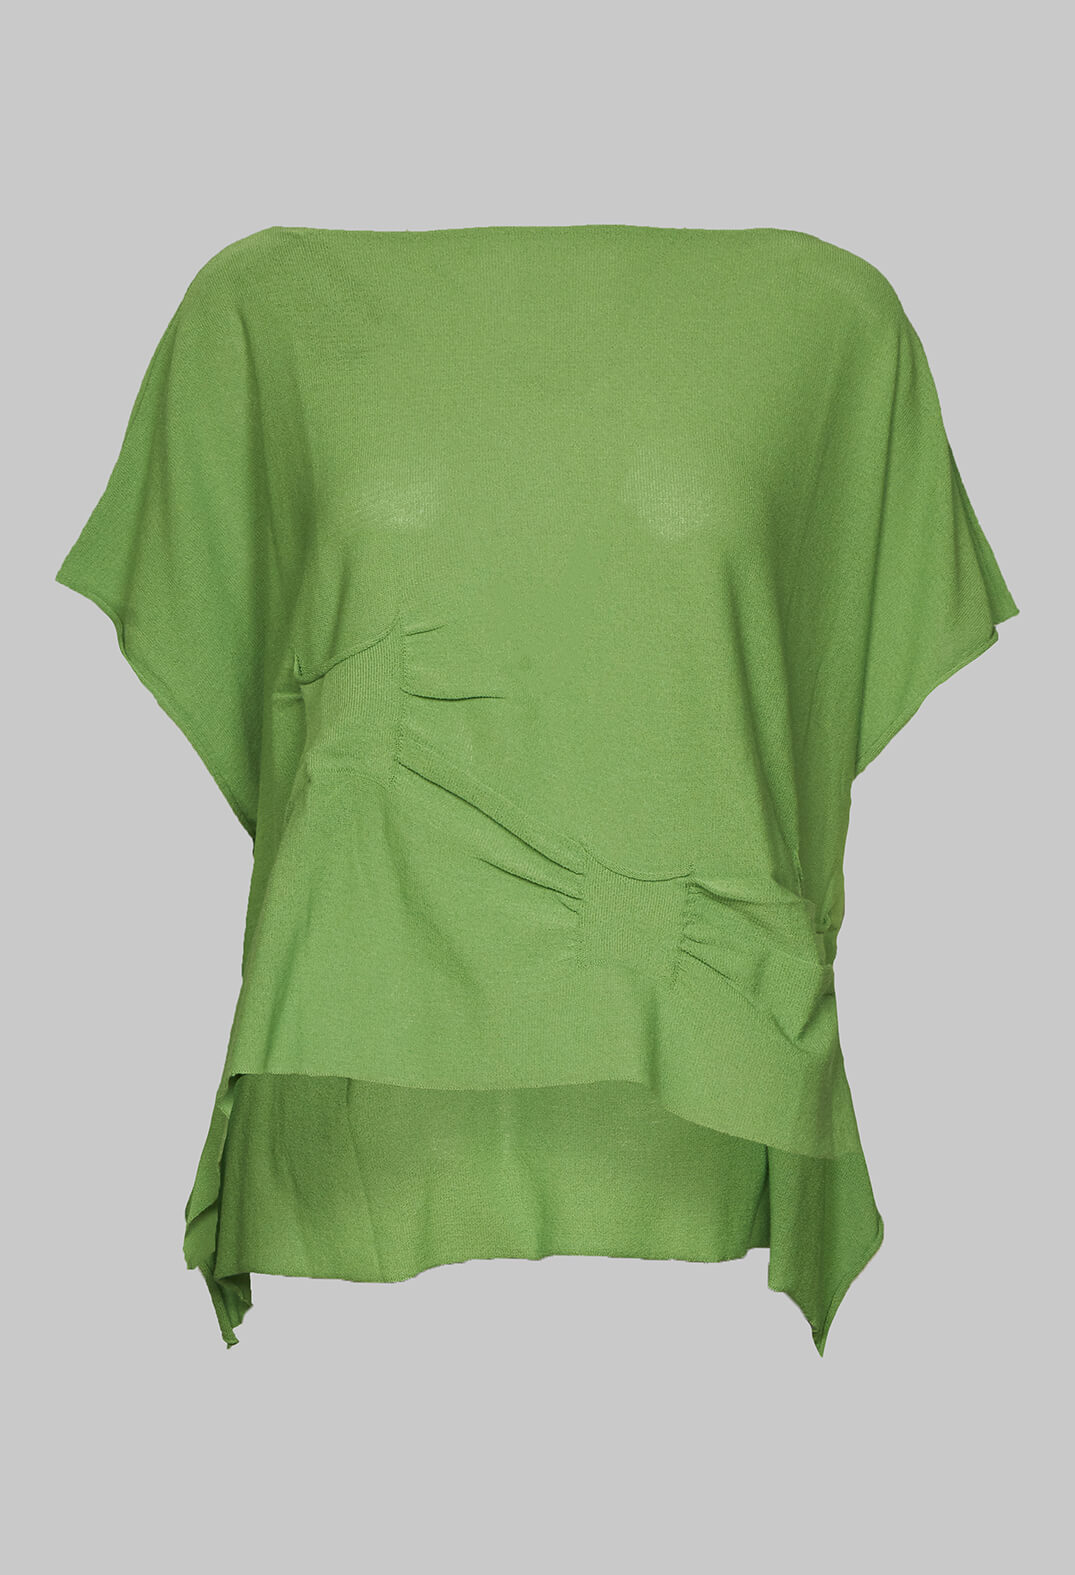 Ruched Sleeveless Sweater in Green